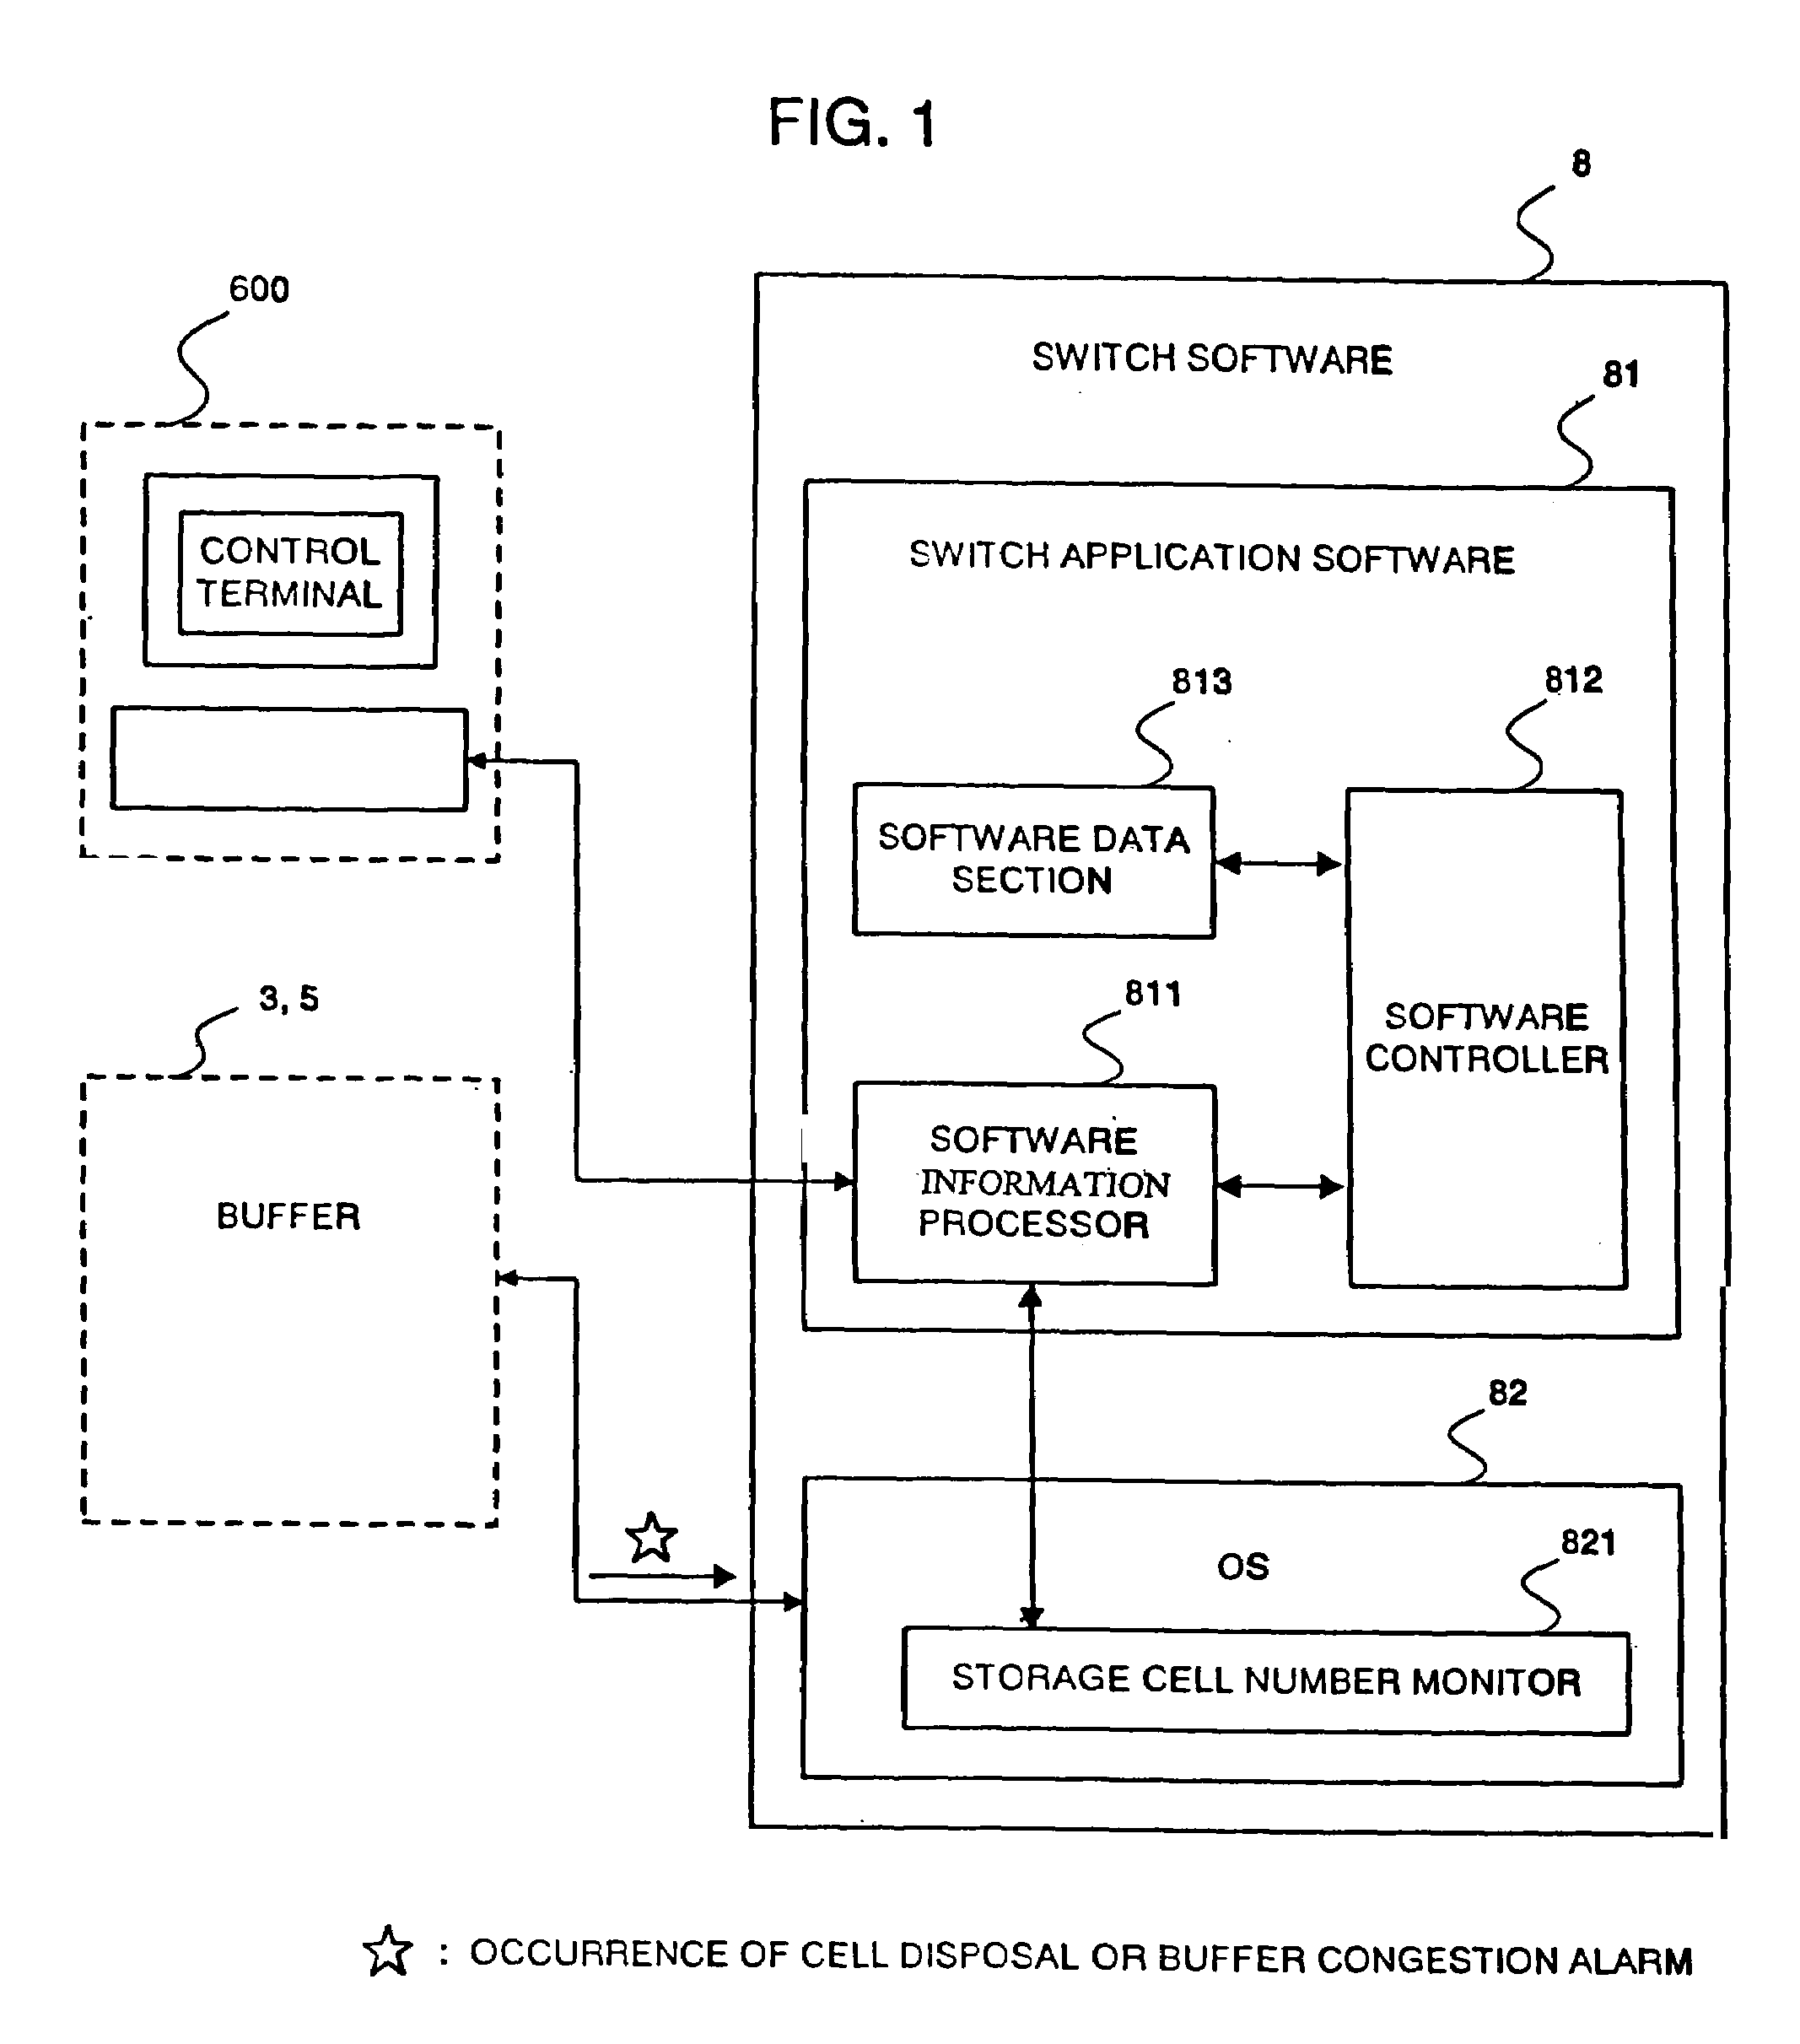 System and method of avoiding cell disposal in buffer